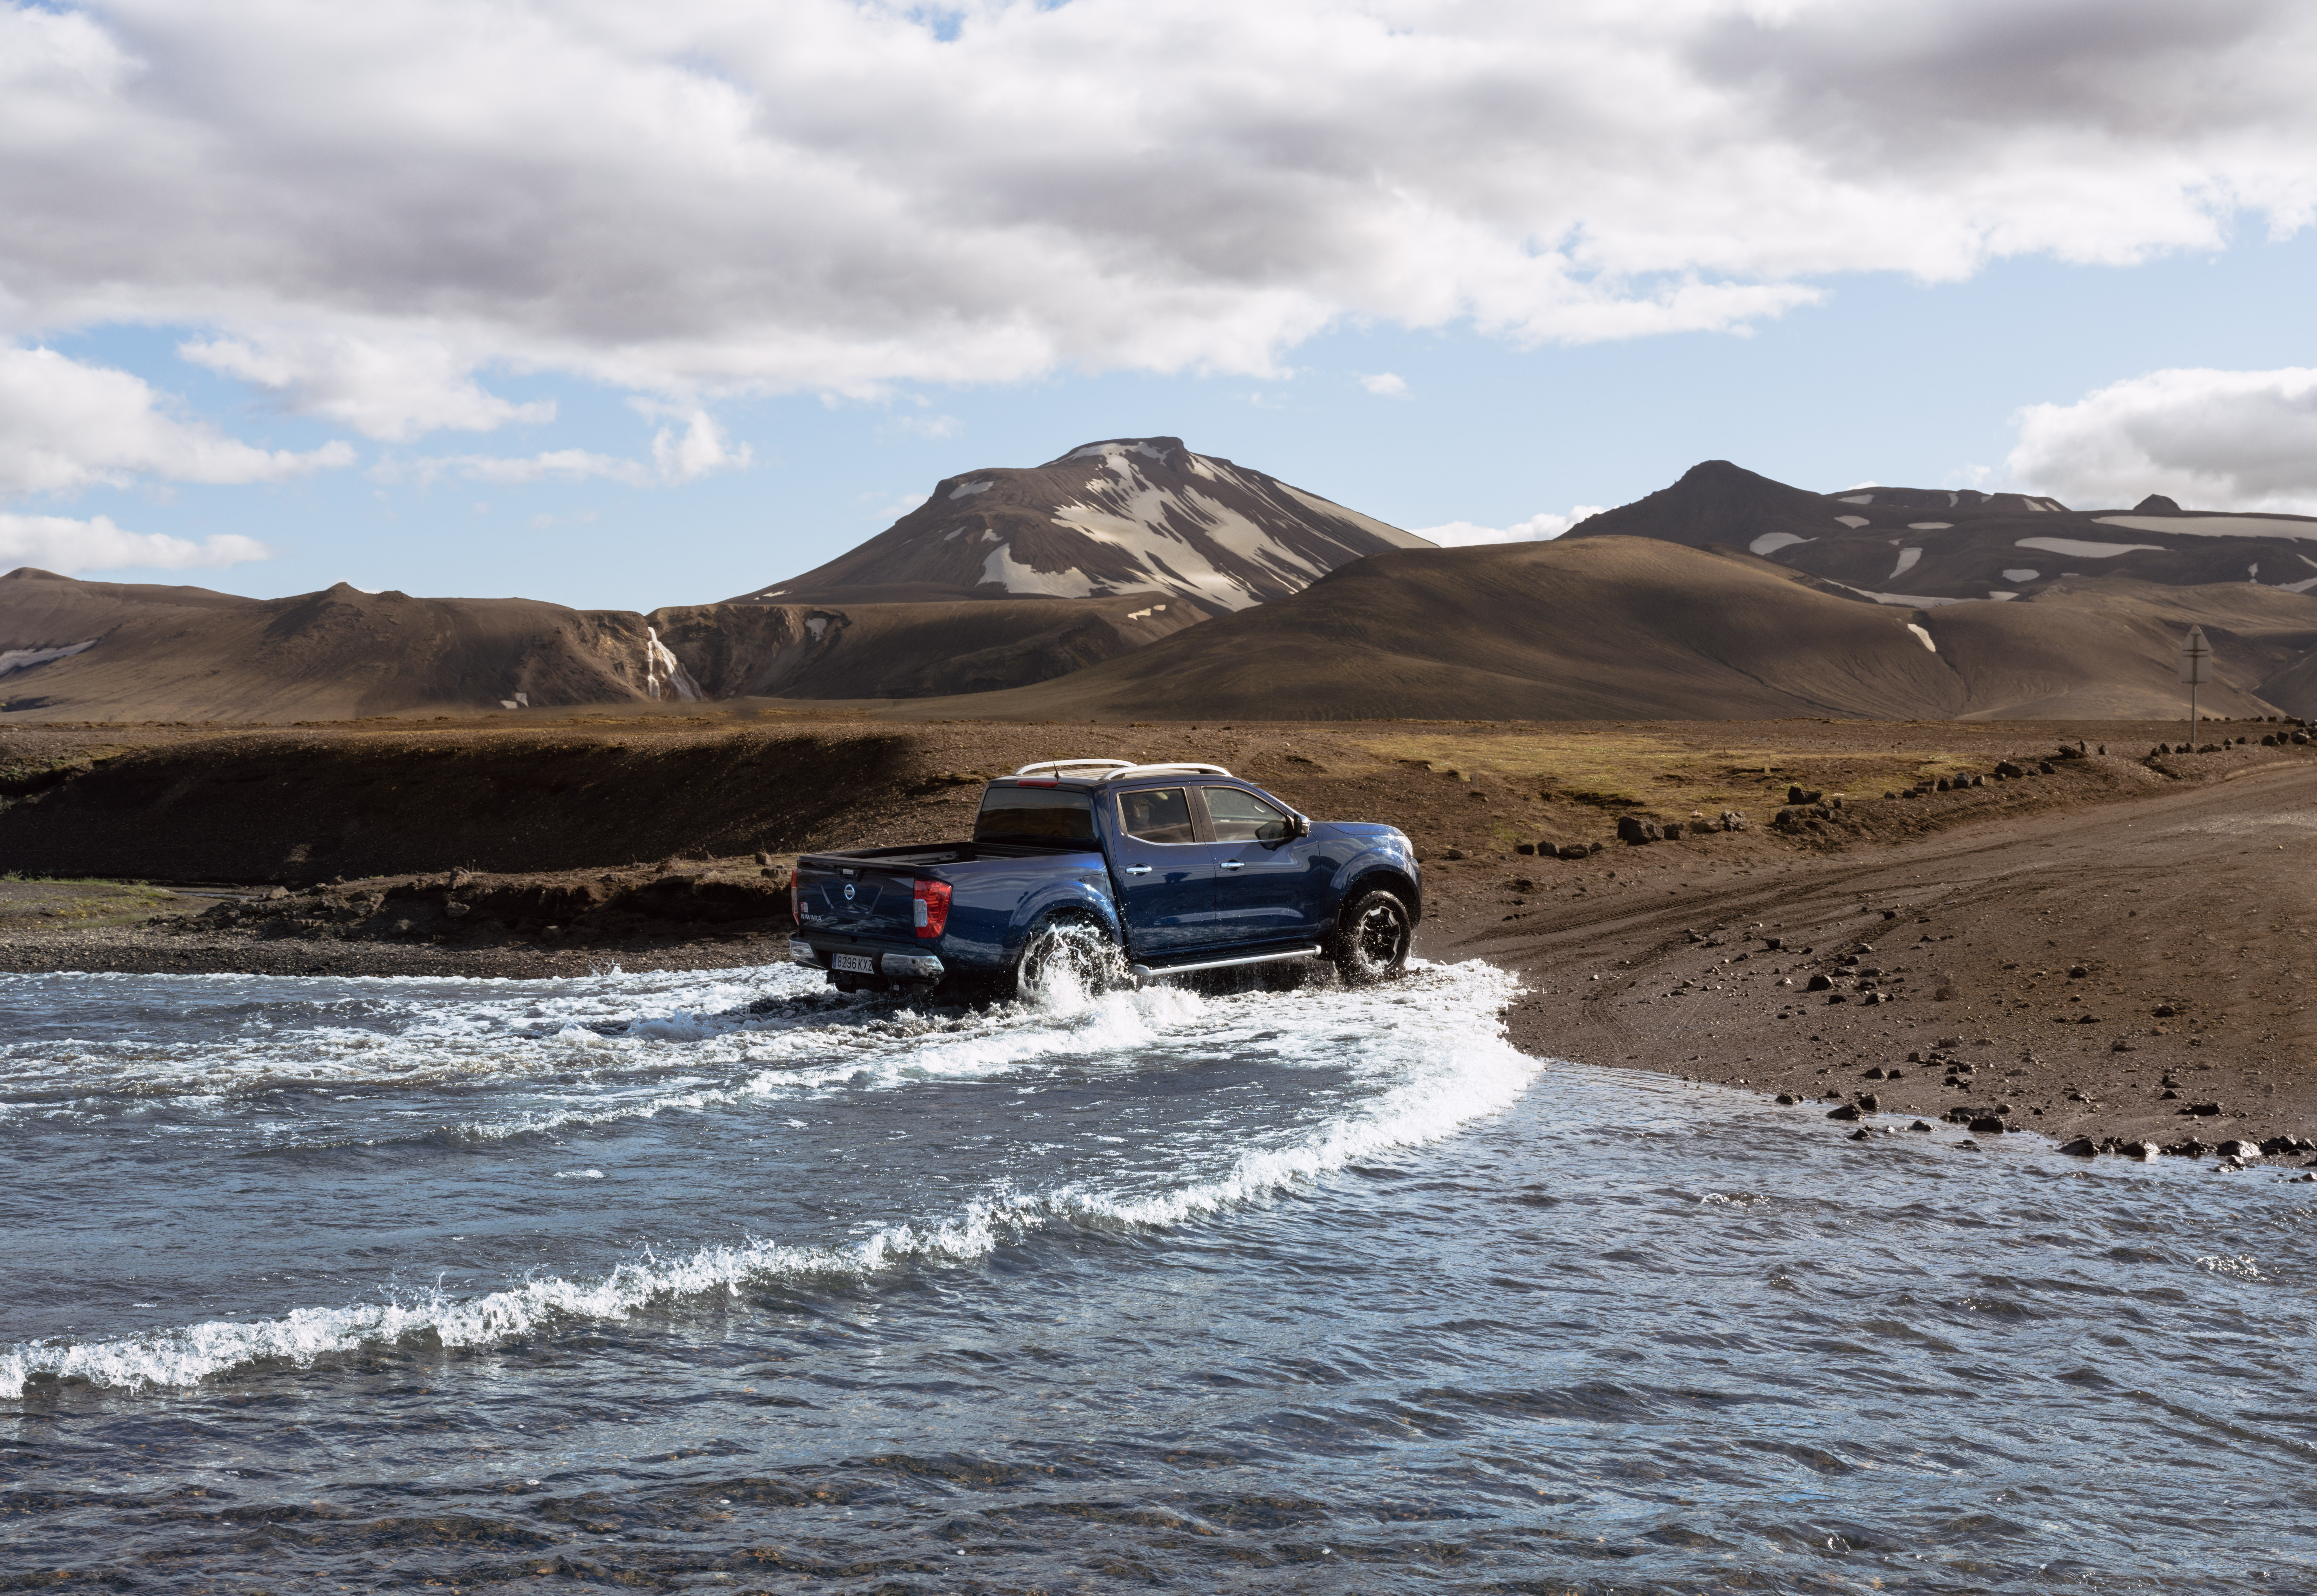 No matter what the surface, the Navara will tackle it